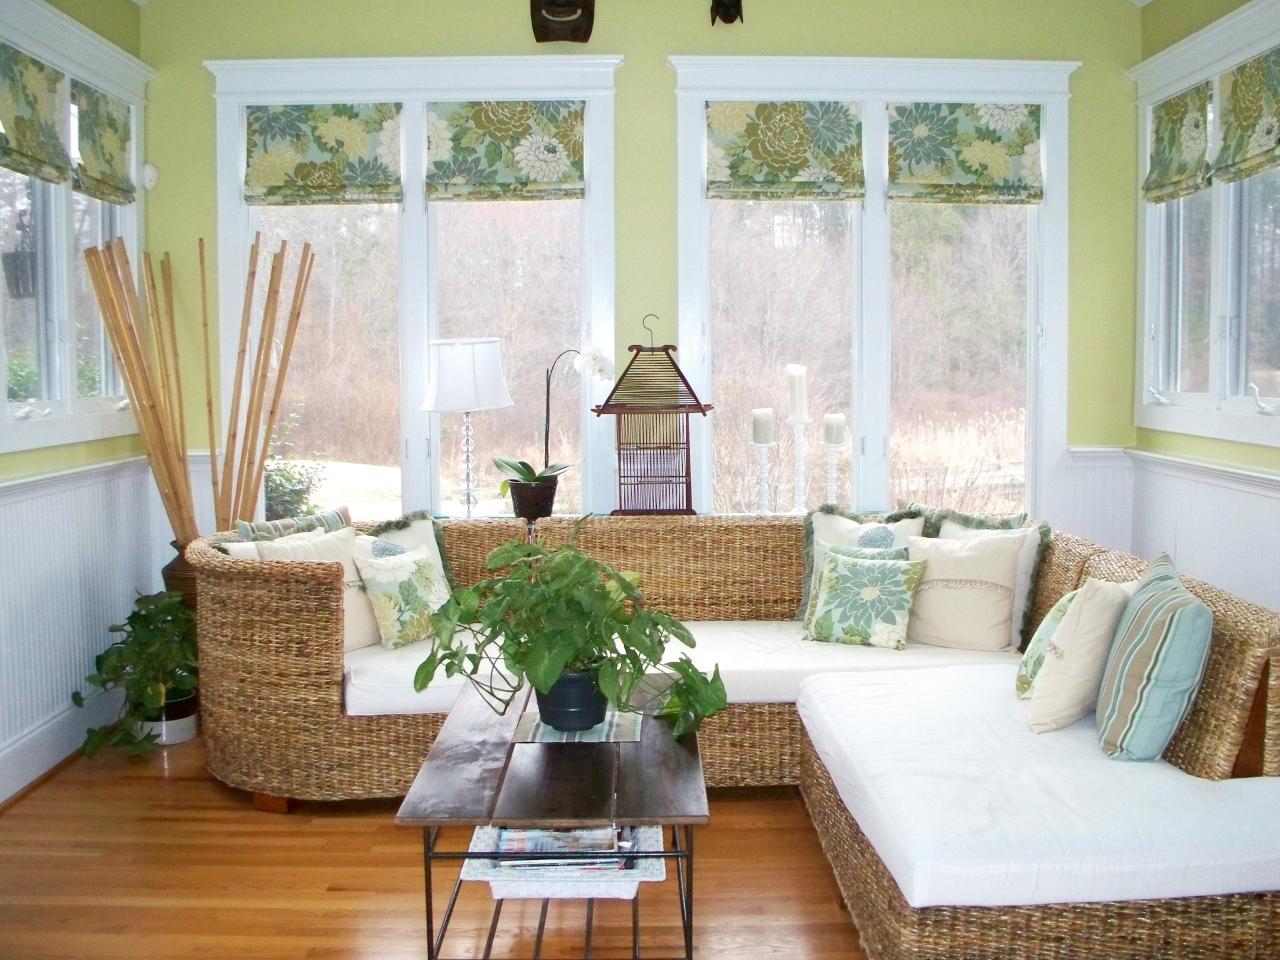 7 Window Treatment Trends and Styles | DIY Home Decor and ...